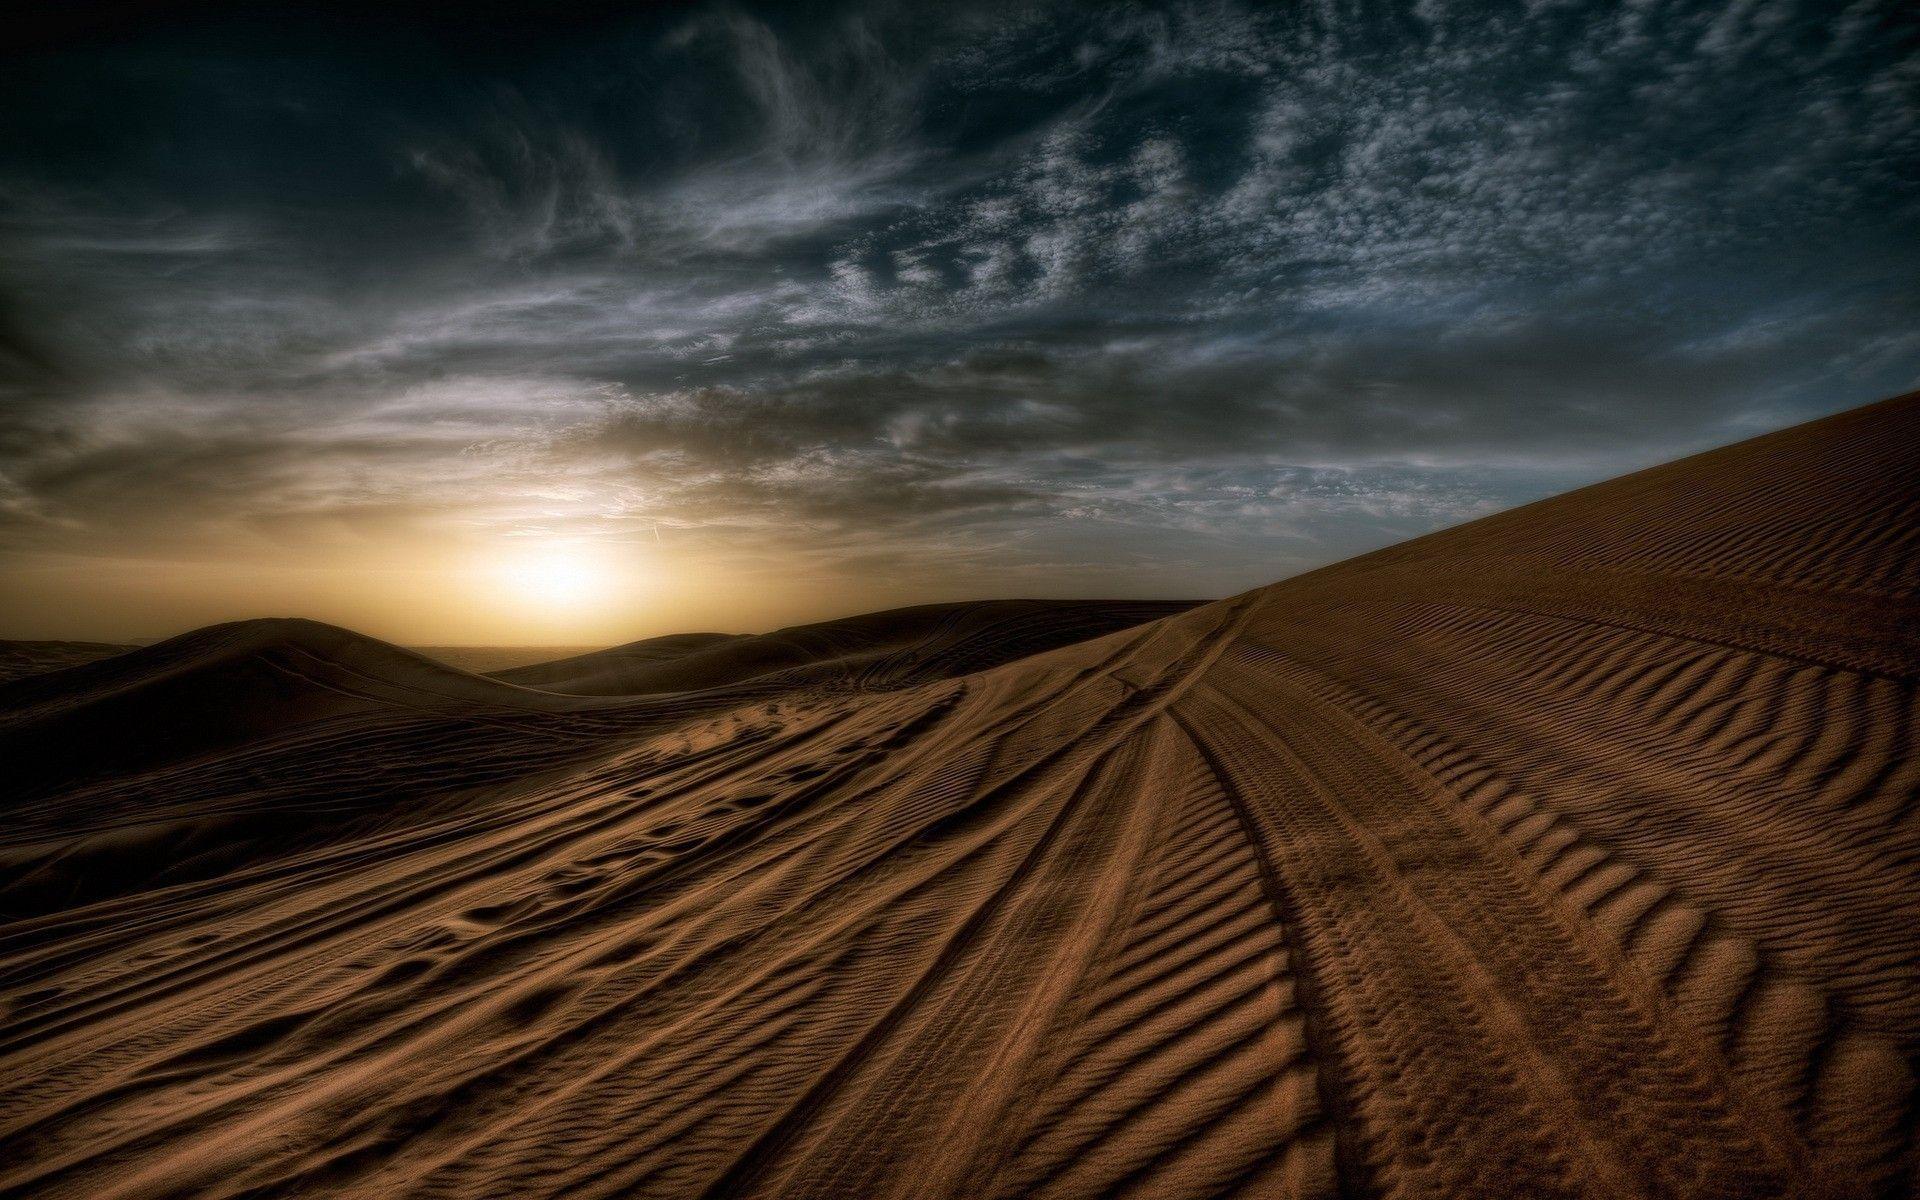 Tire tracks in the sand in the desert wallpaper and image